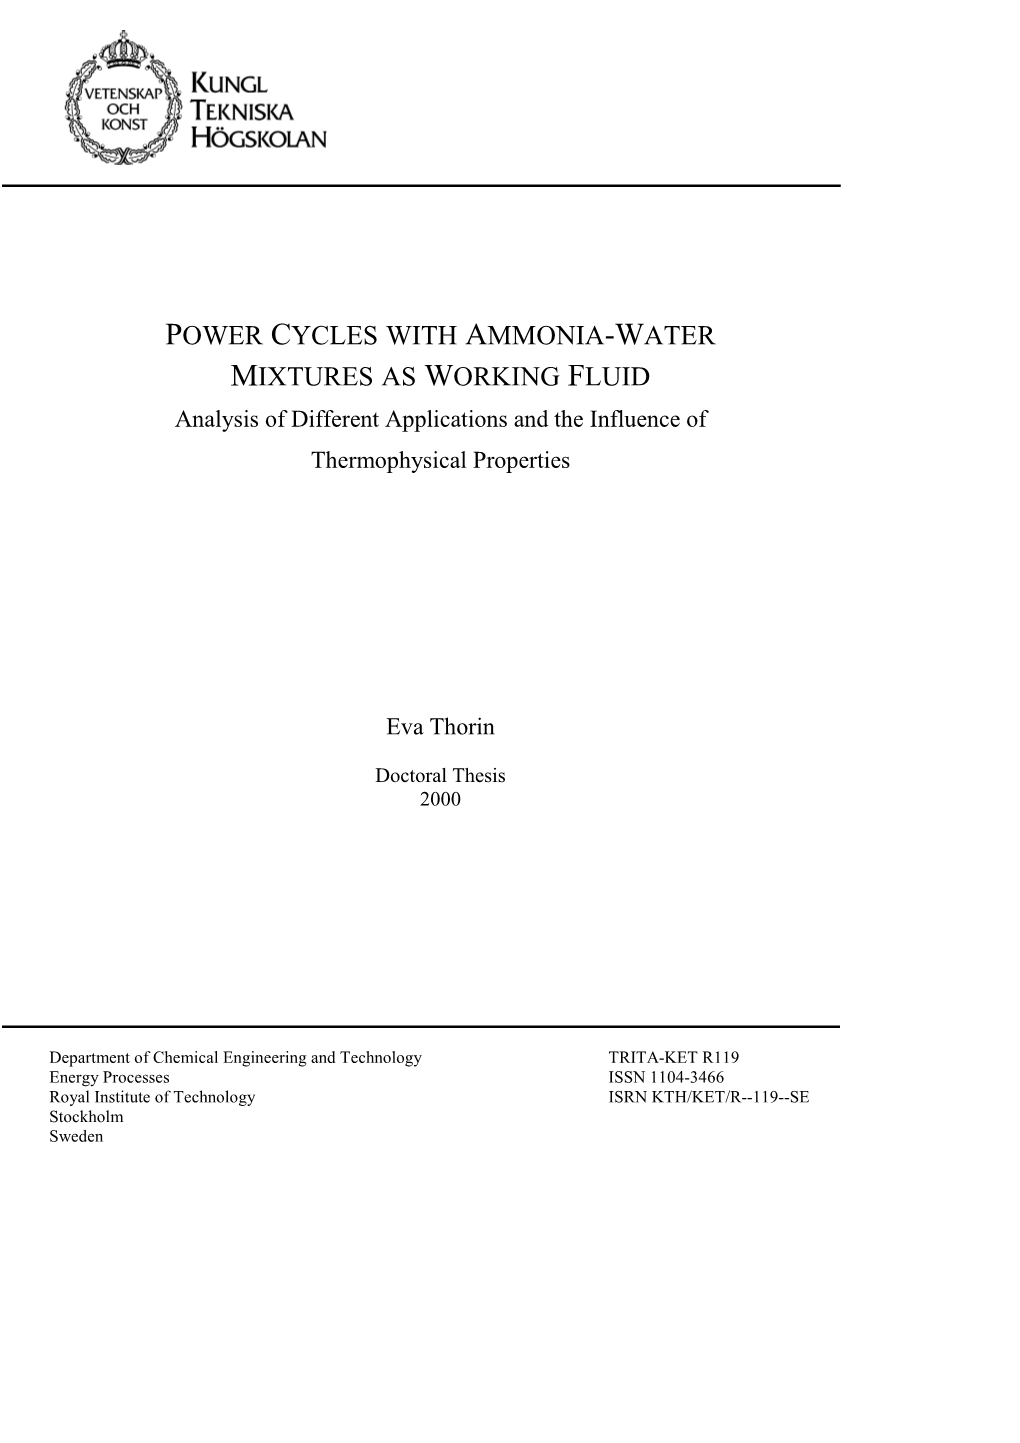 POWER CYCLES with AMMONIA-WATER MIXTURES AS WORKING FLUID Analysis of Different Applications and the Influence of Thermophysical Properties